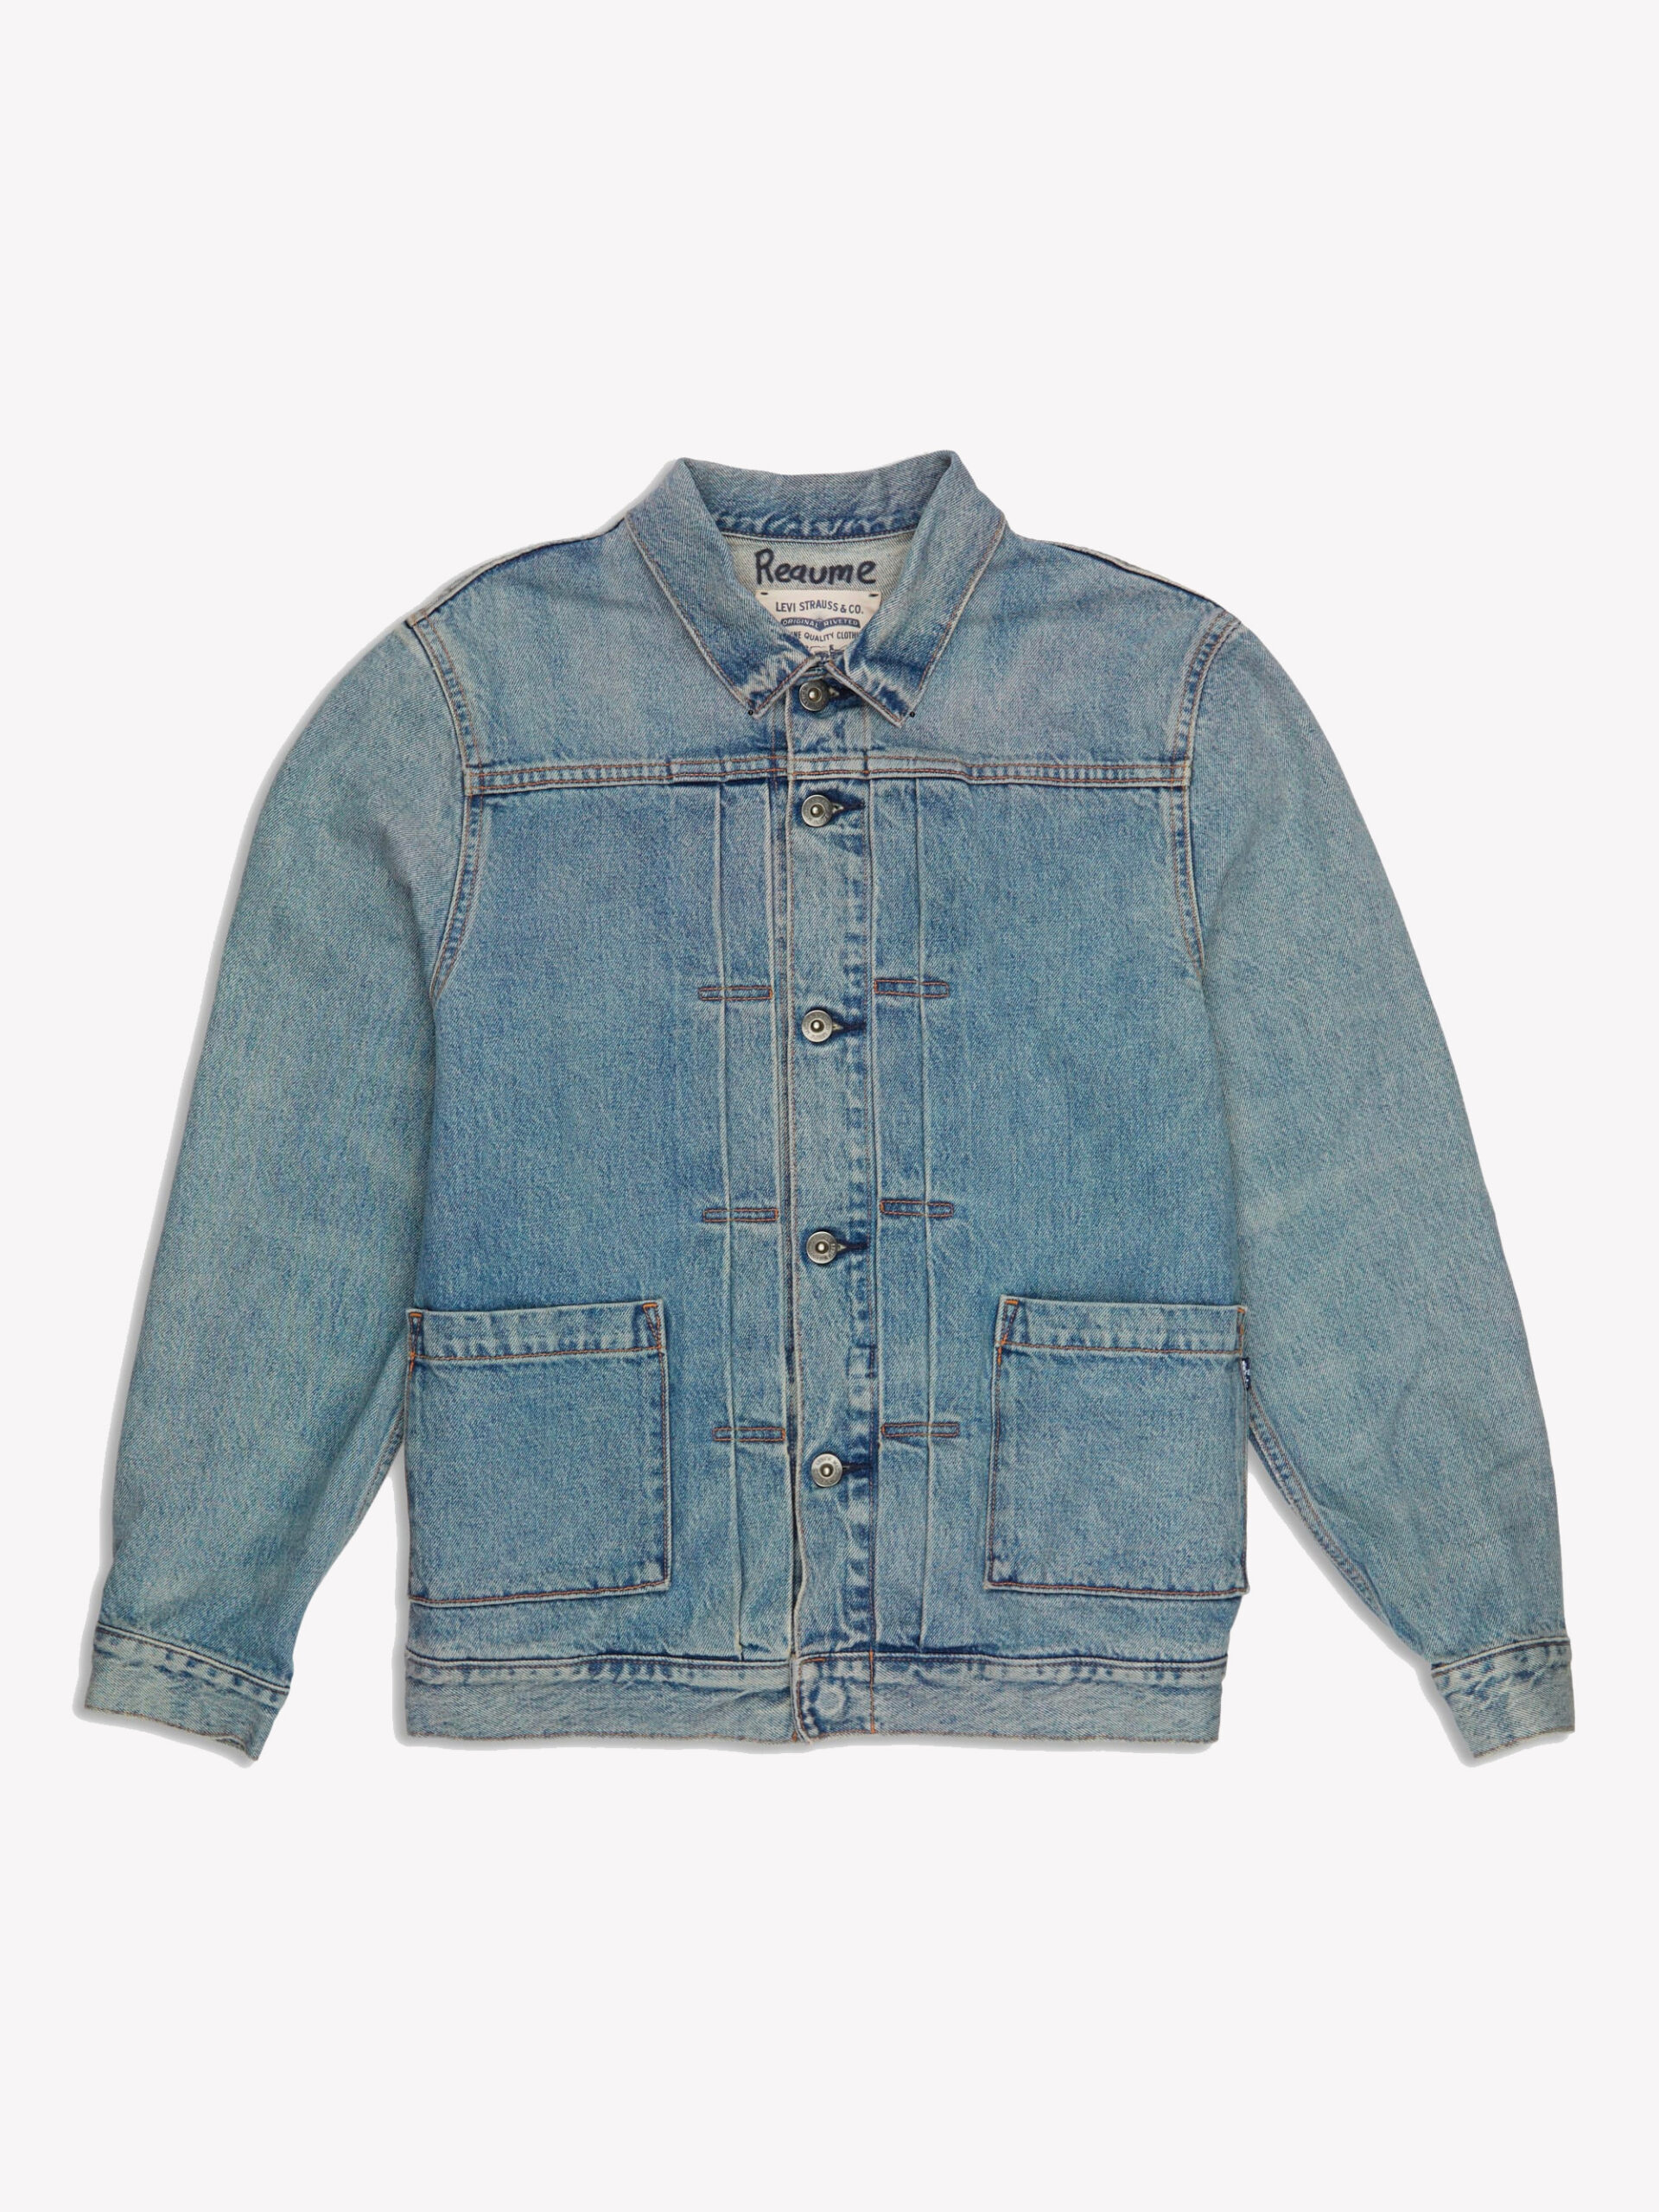 A Levi's sustainable jacket for men